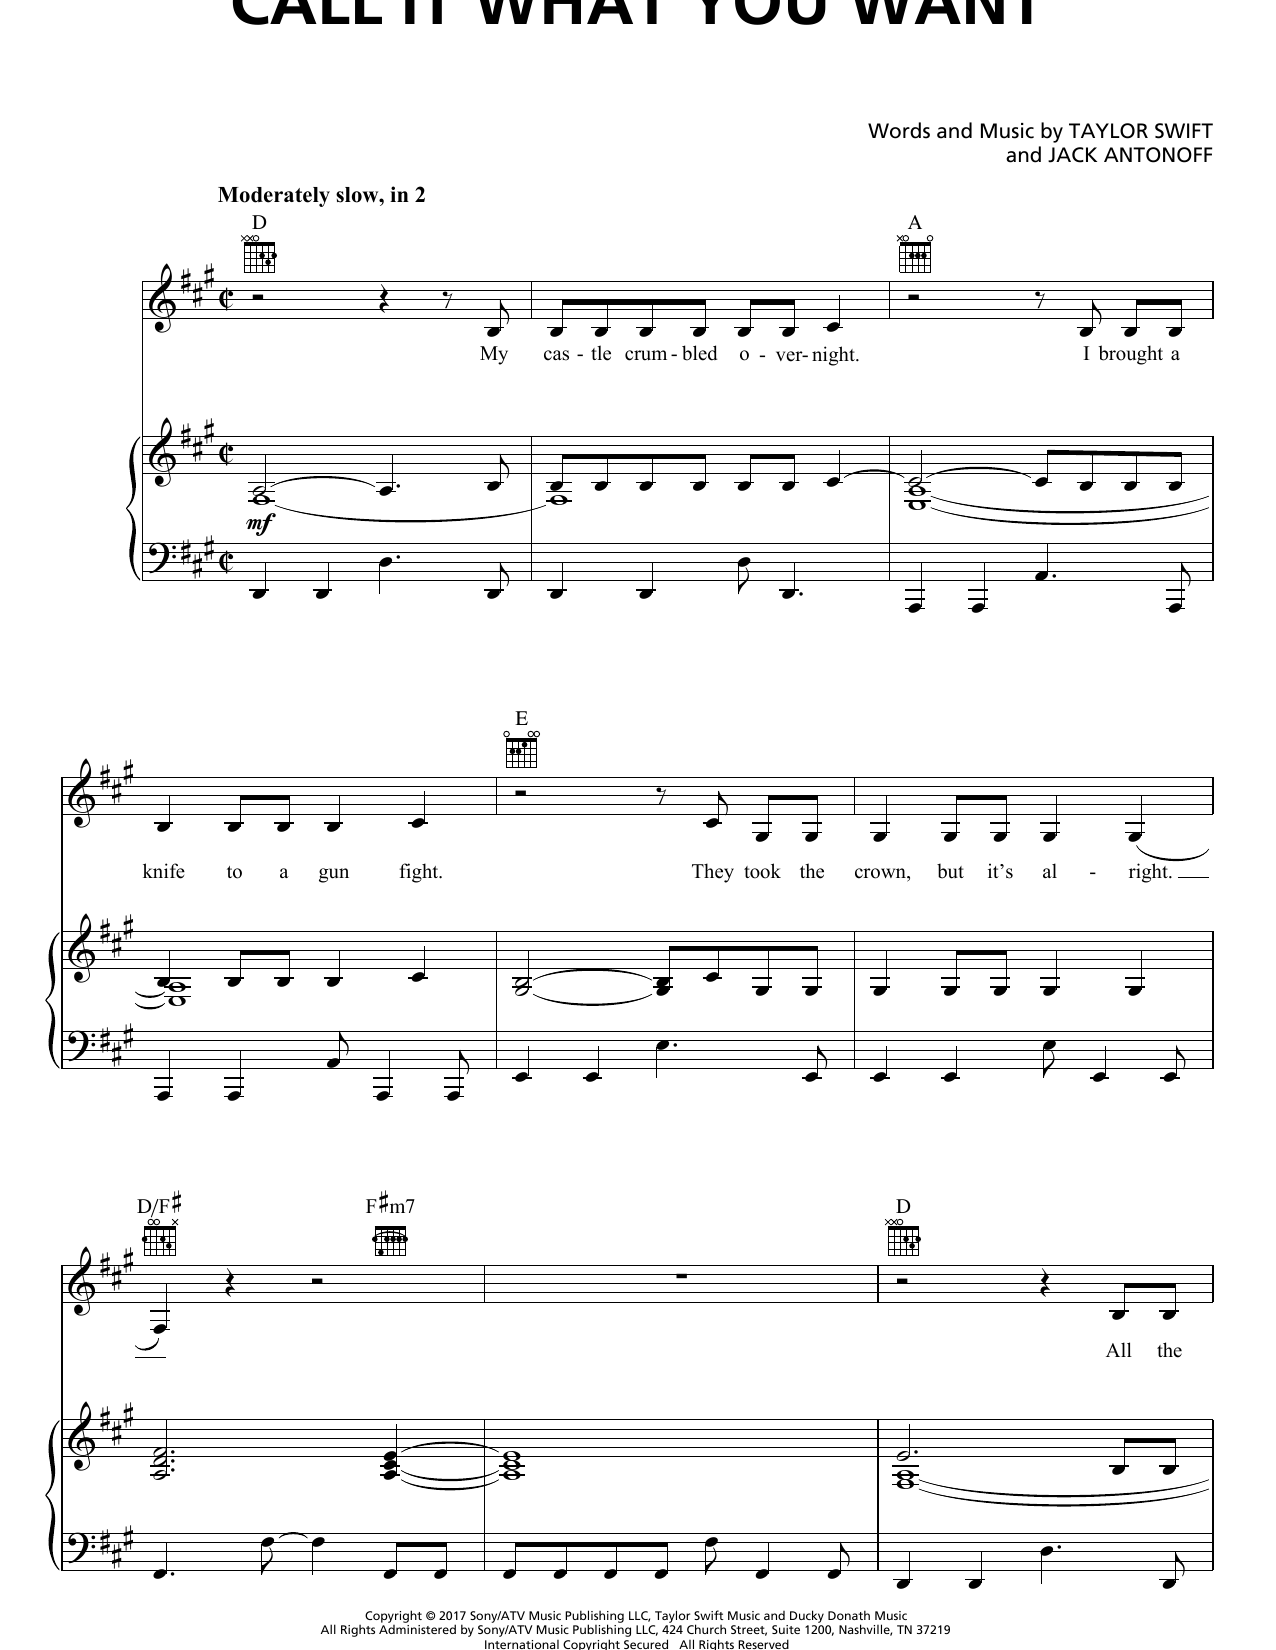 Download Taylor Swift Call It What You Want Sheet Music